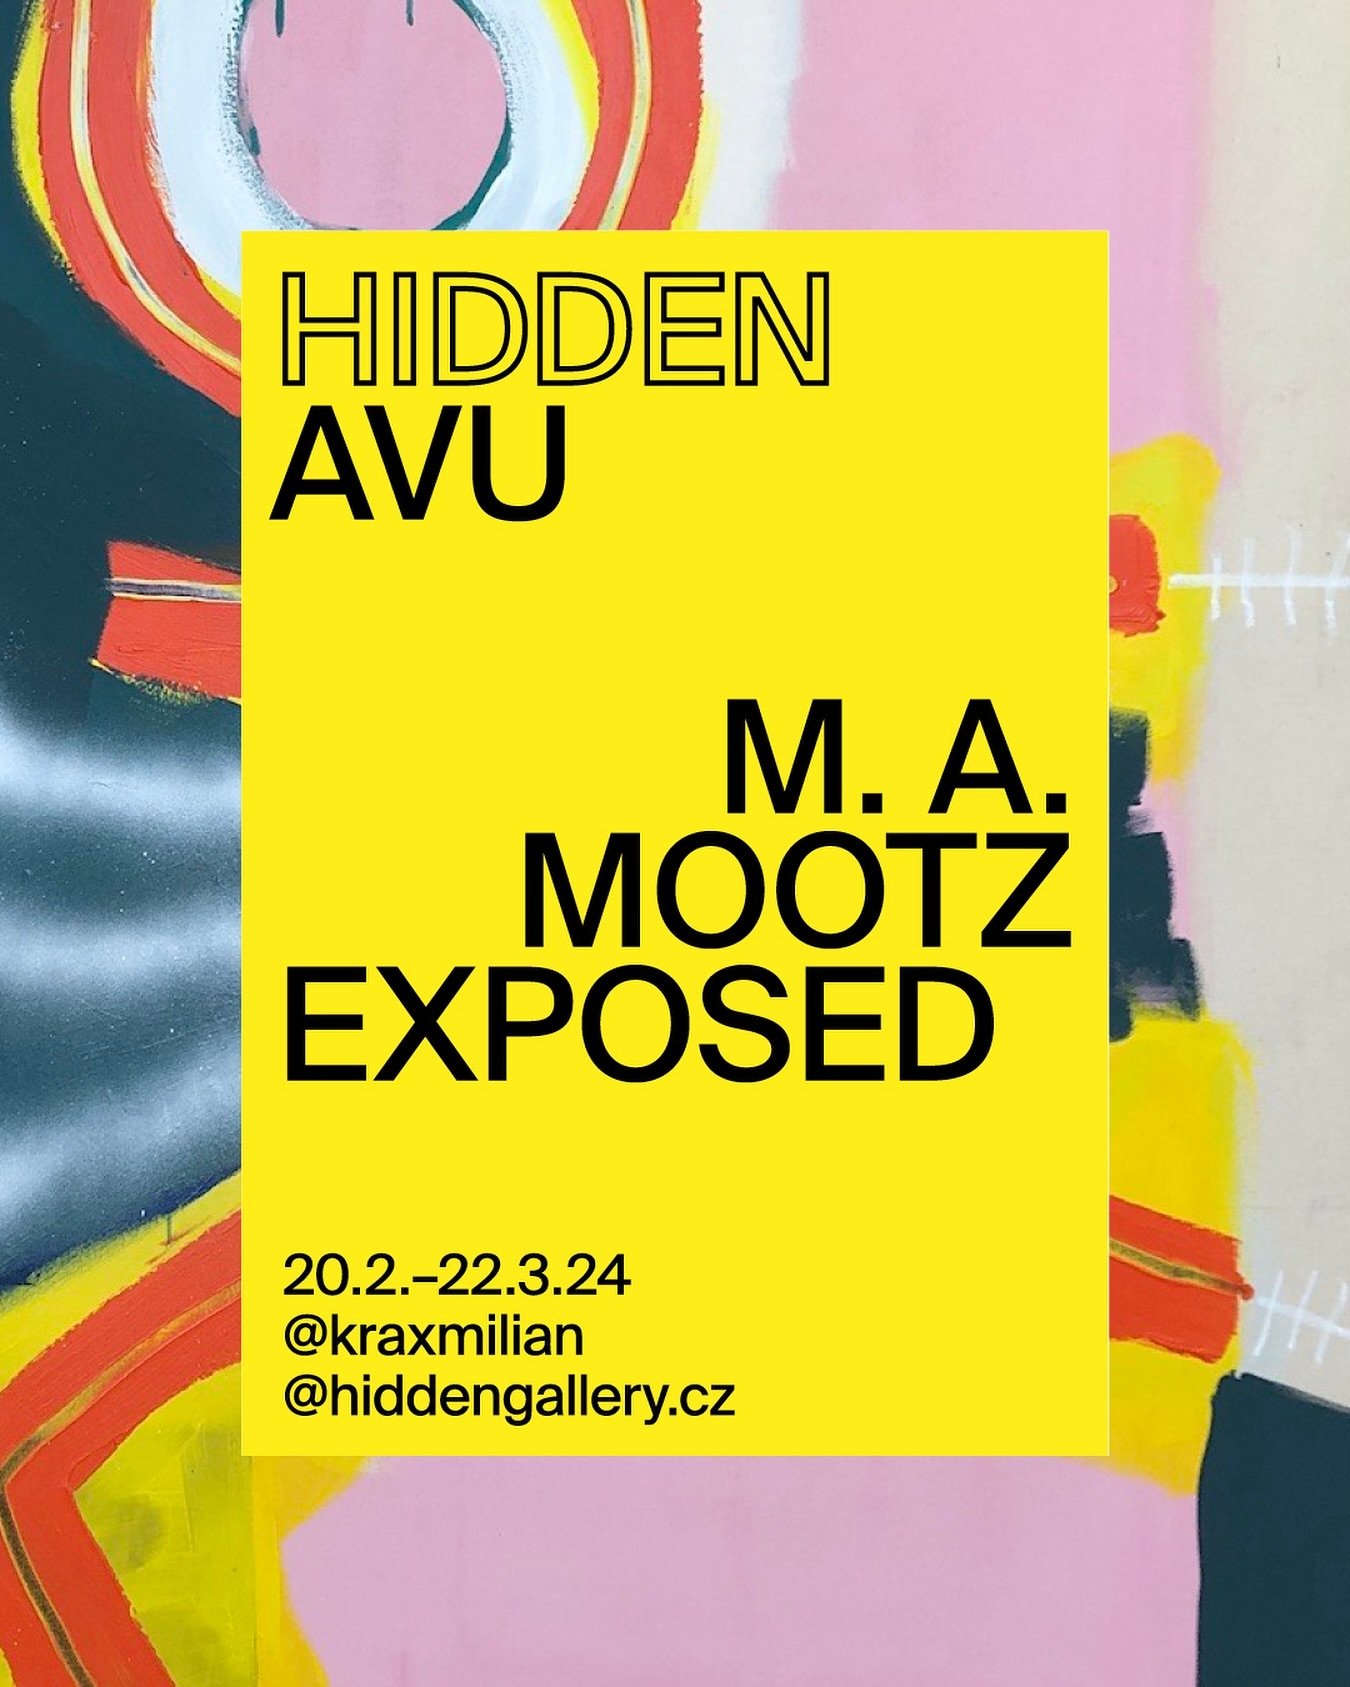 I&rsquo;m excited to reveal our first exhibition of total two at the brand new HIDDEN space in N&aacute;draž&iacute; Hole&scaron;ovice! 🎨 Join us for @kraxmilian at HIDDEN AVU, a dynamic collaboration with @avumalba2 of @avu_prague . Don&rsquo;t mis